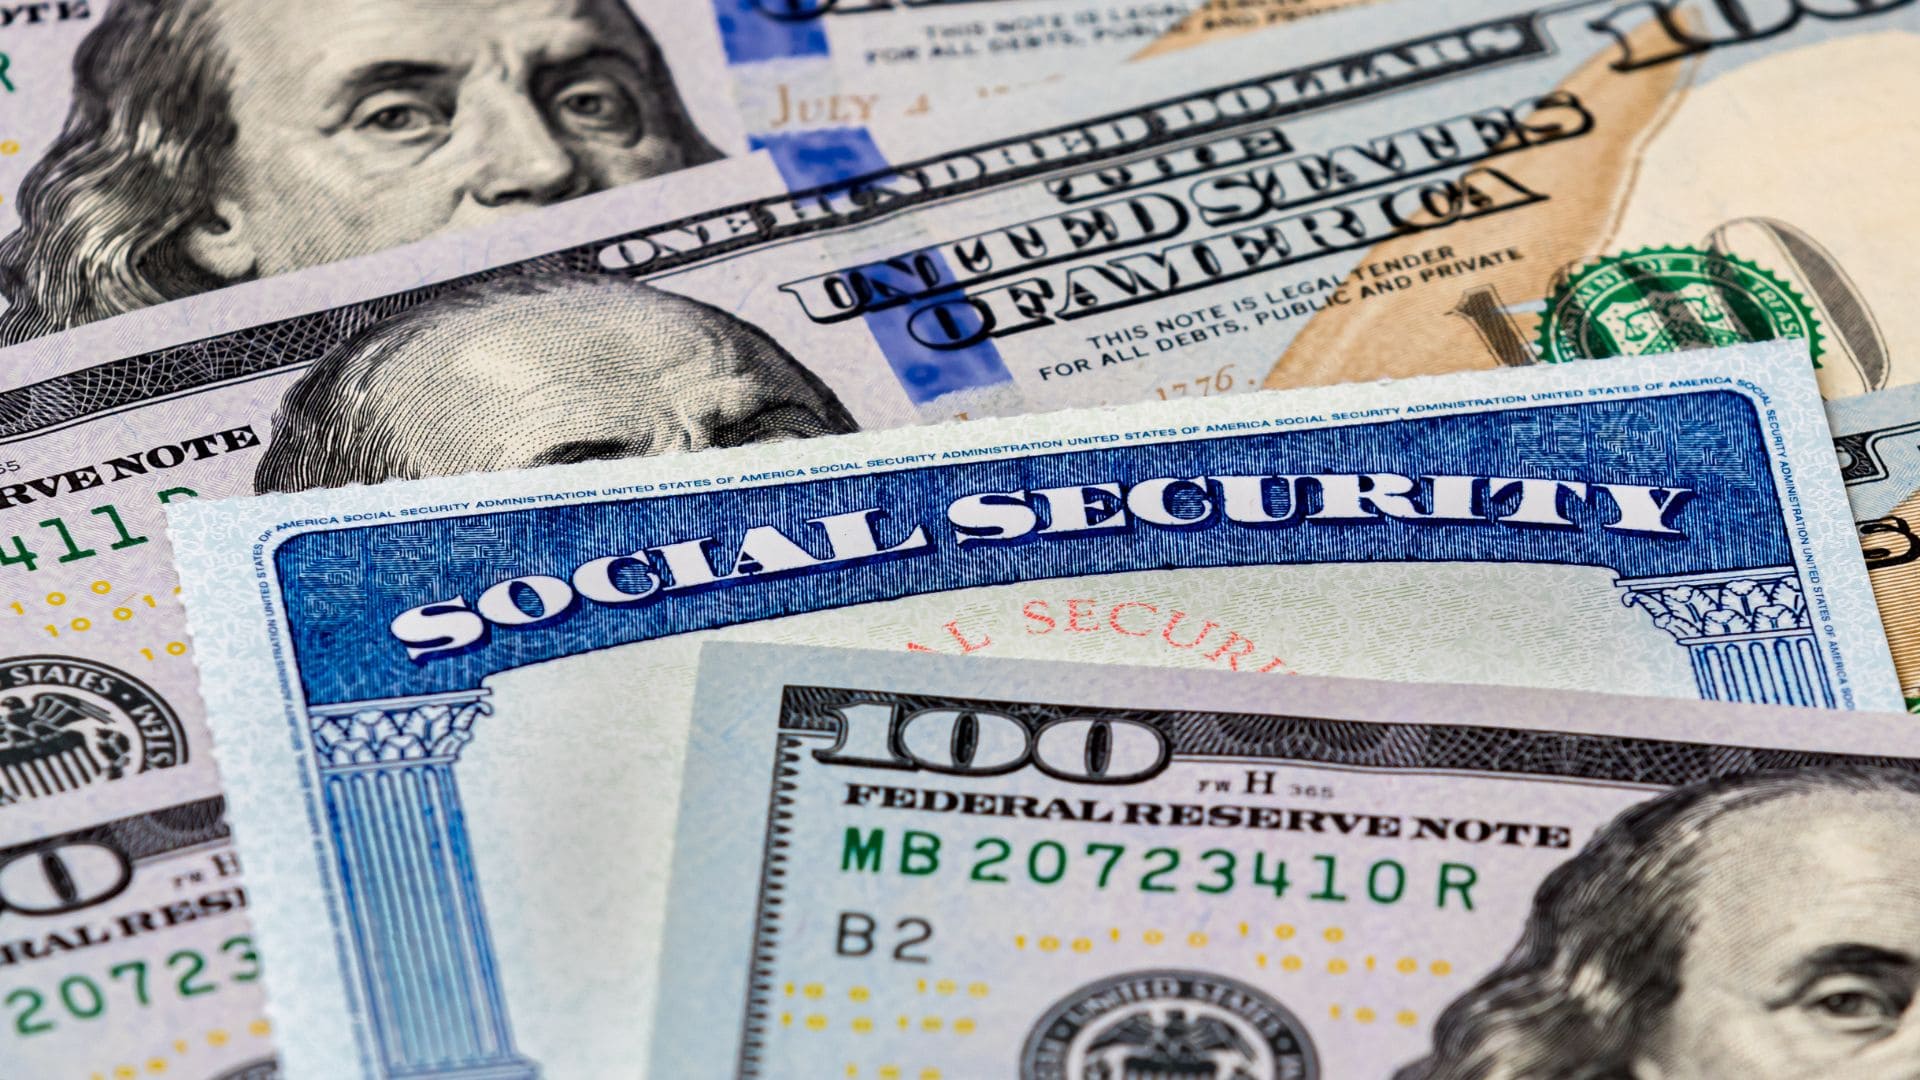 Social Security is sending a new Disability payment to a group of Americans